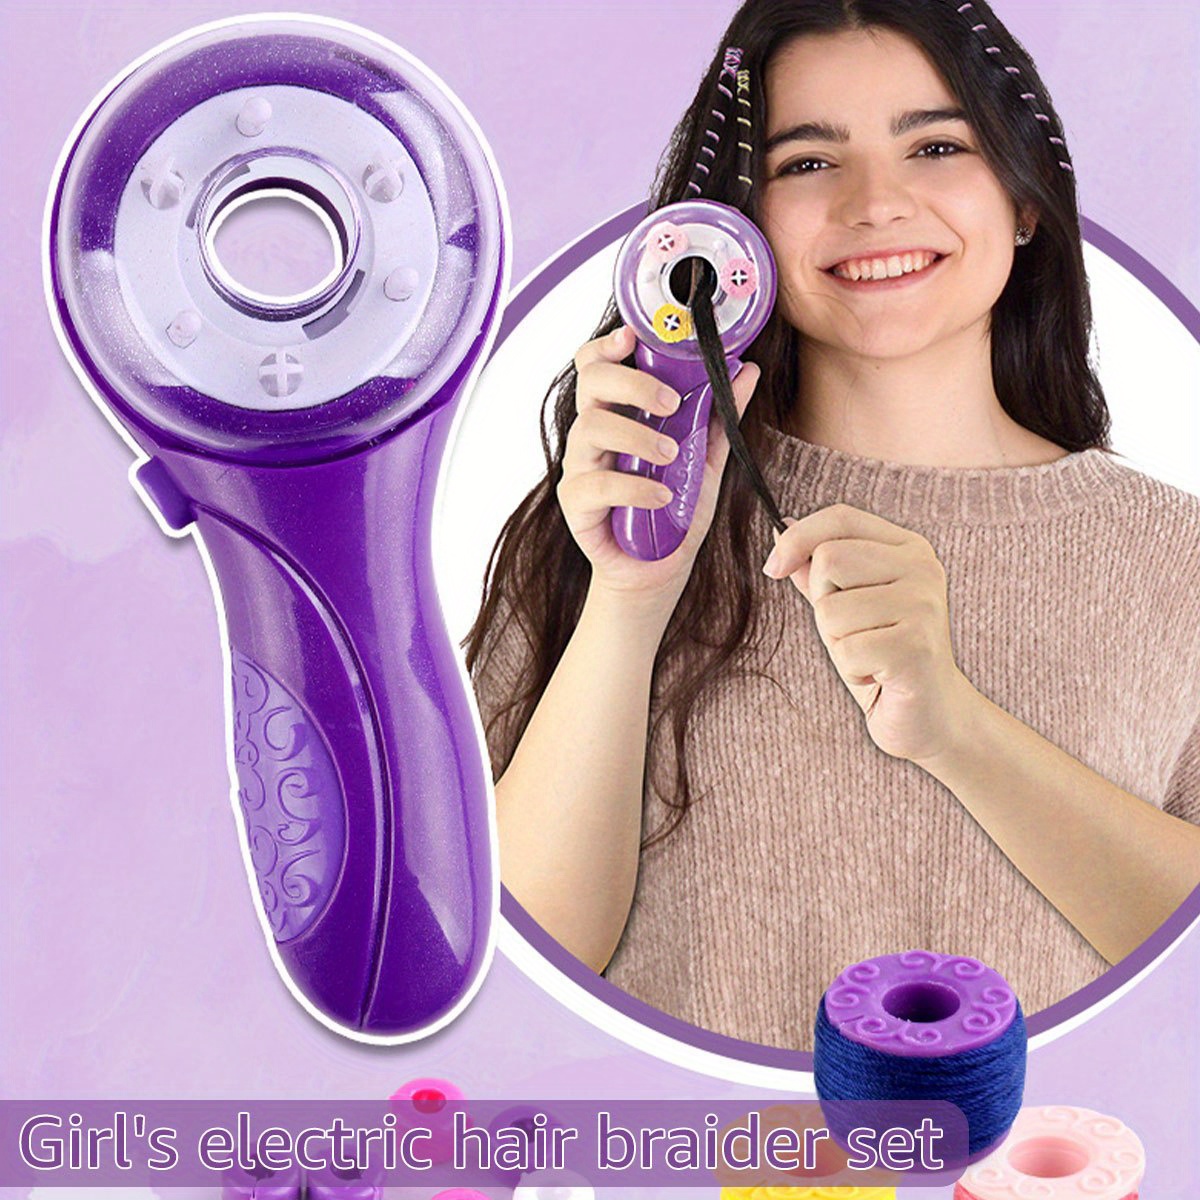  Automatic DIY Hair Braider, Electric Twist Machine Knitted  Device Styling Tools For Girls Boys Women Men : Beauty & Personal Care